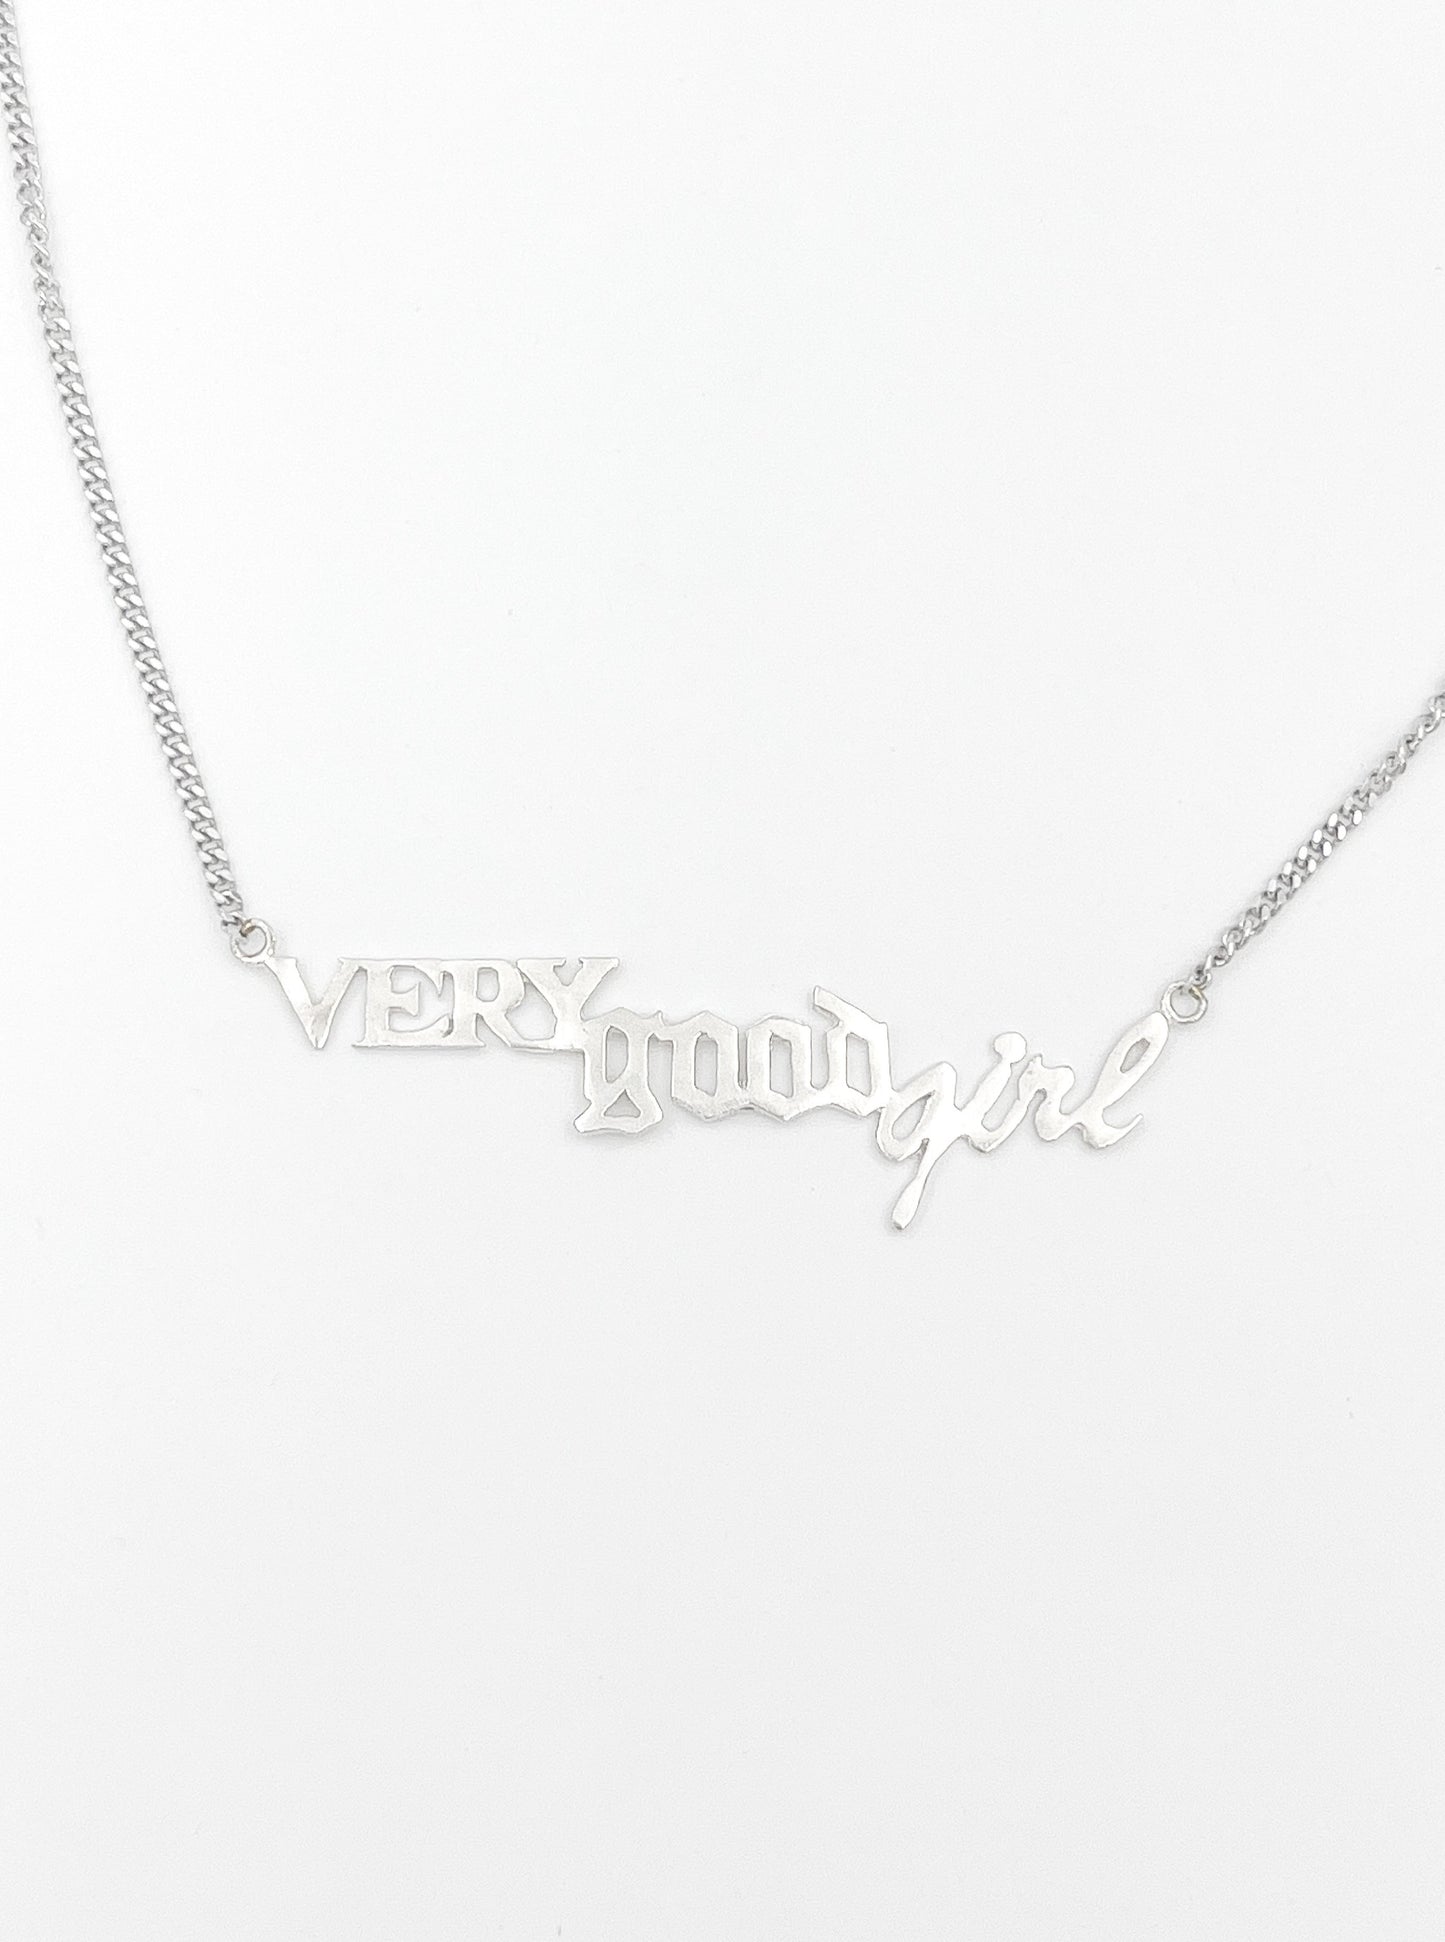 VERY GOOD GIRL NECKLACE